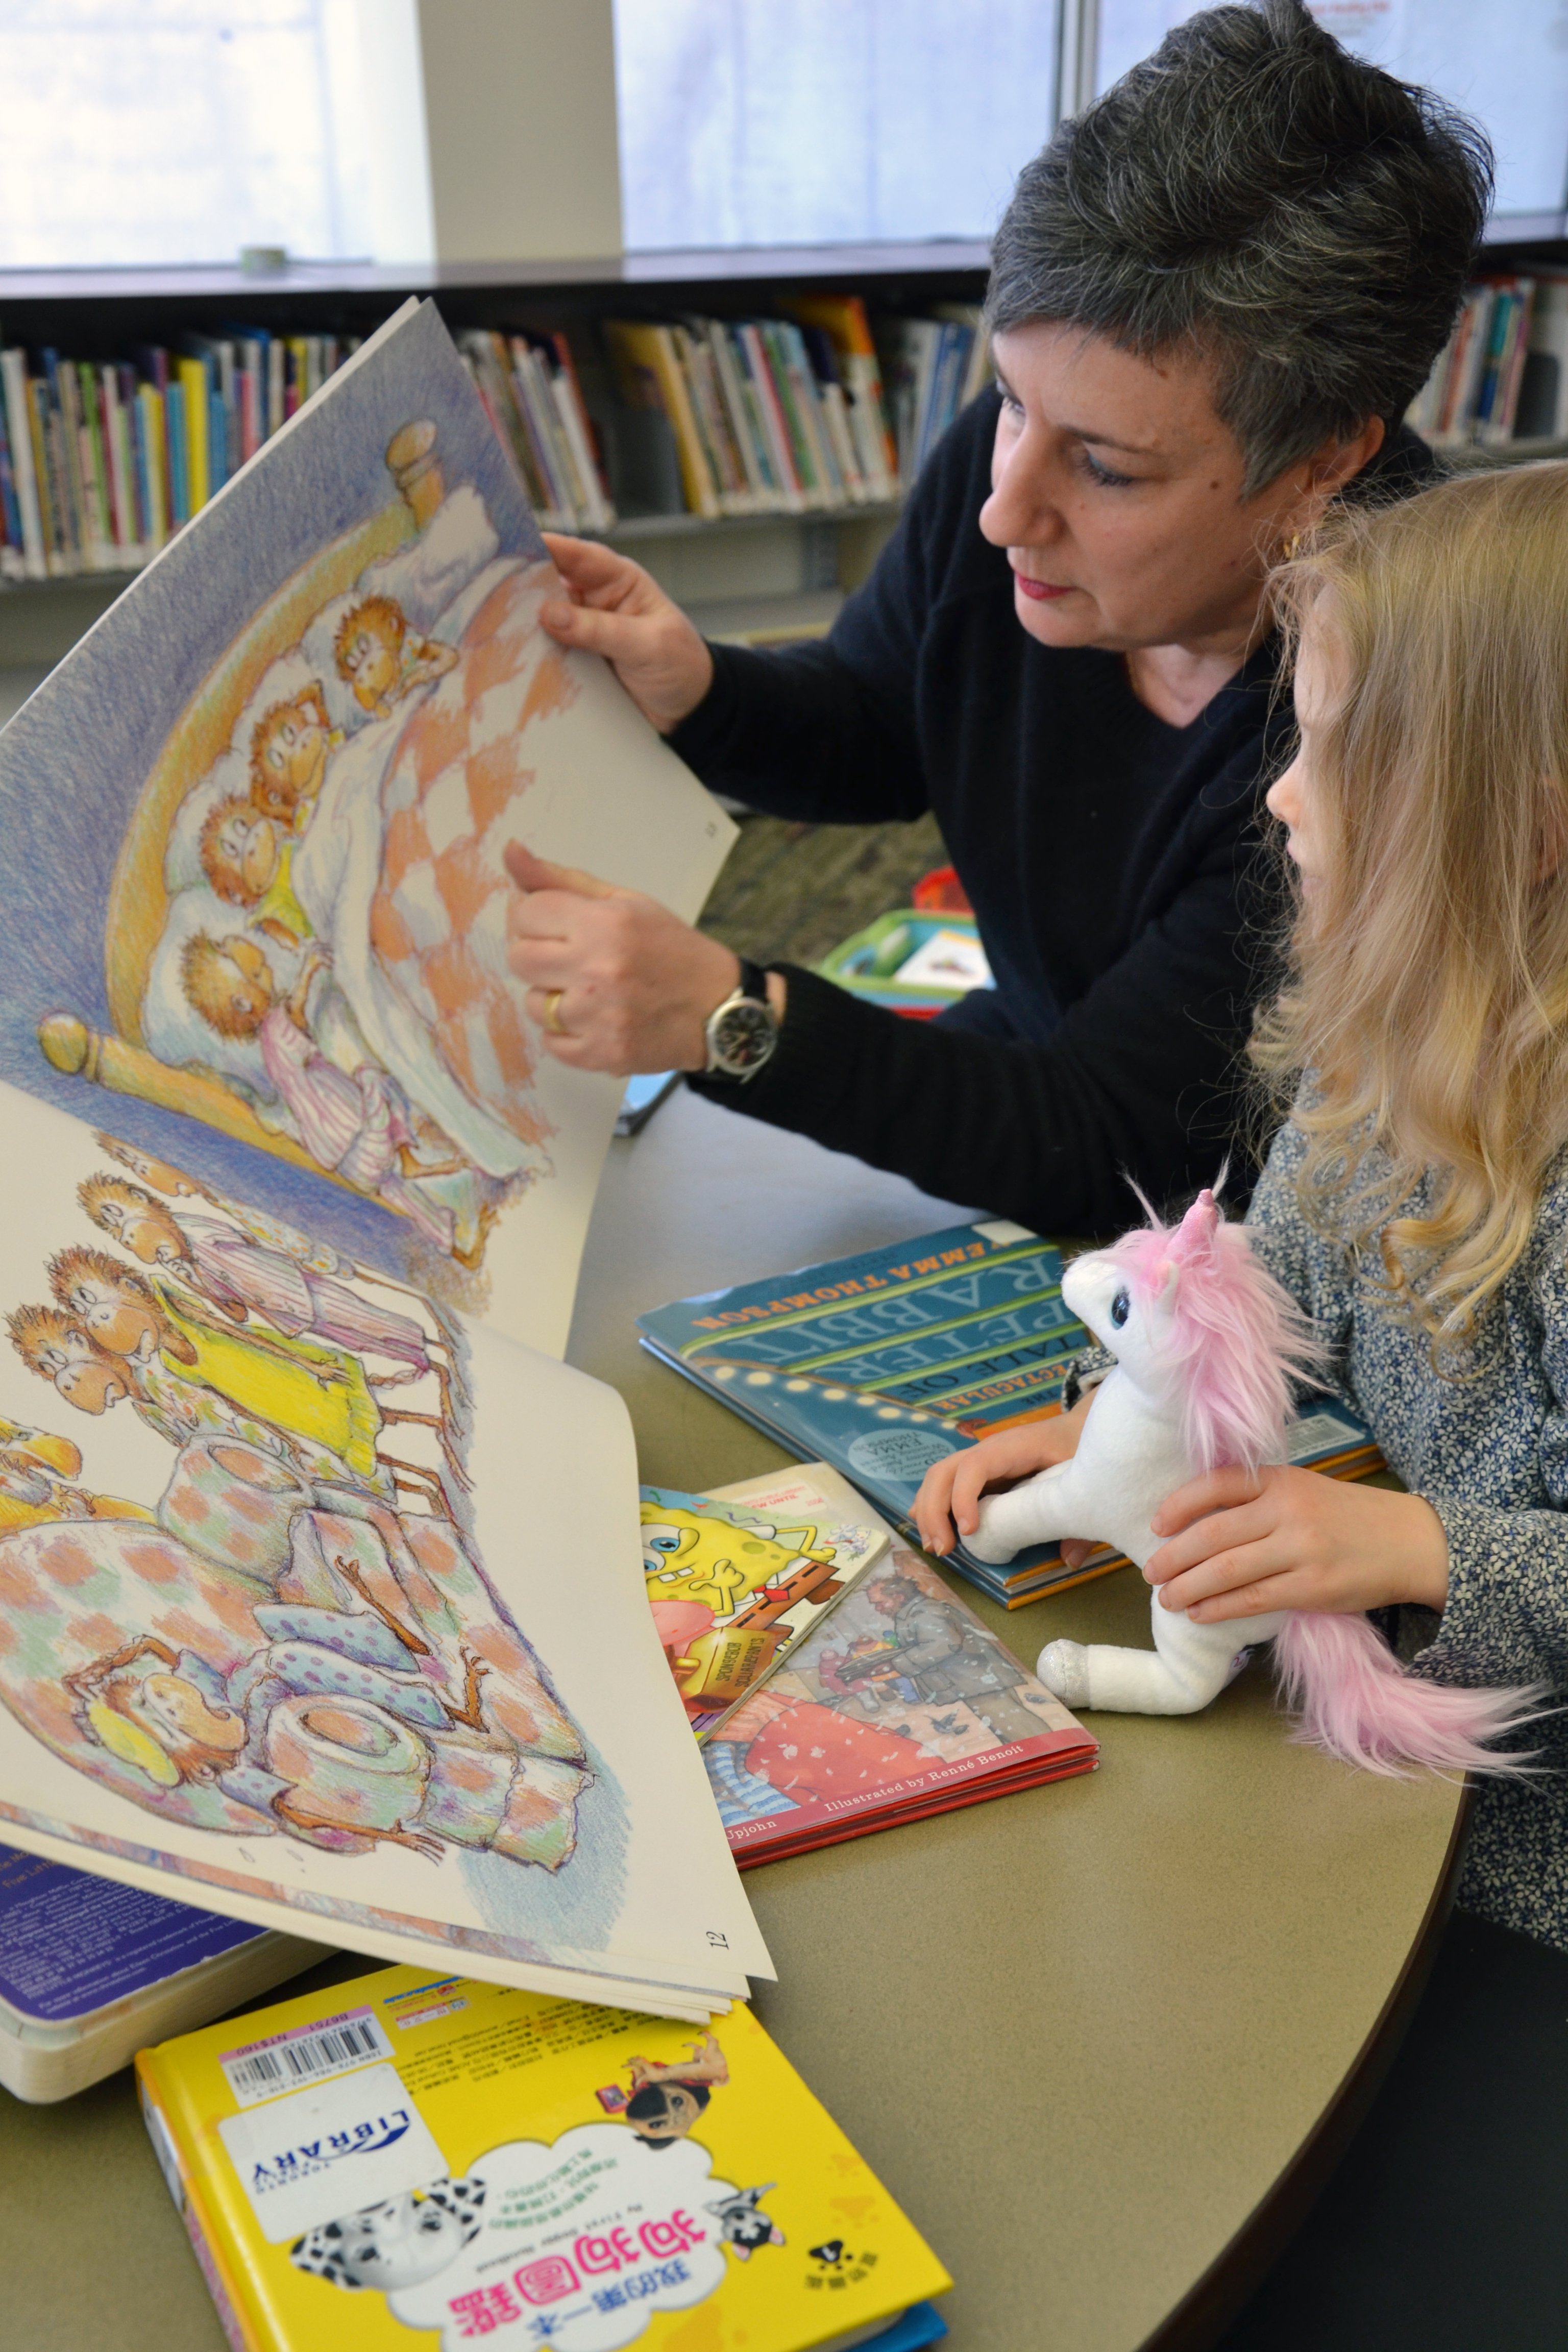 A library worker reading a book to a small child. The child is holding a pink unicorn.